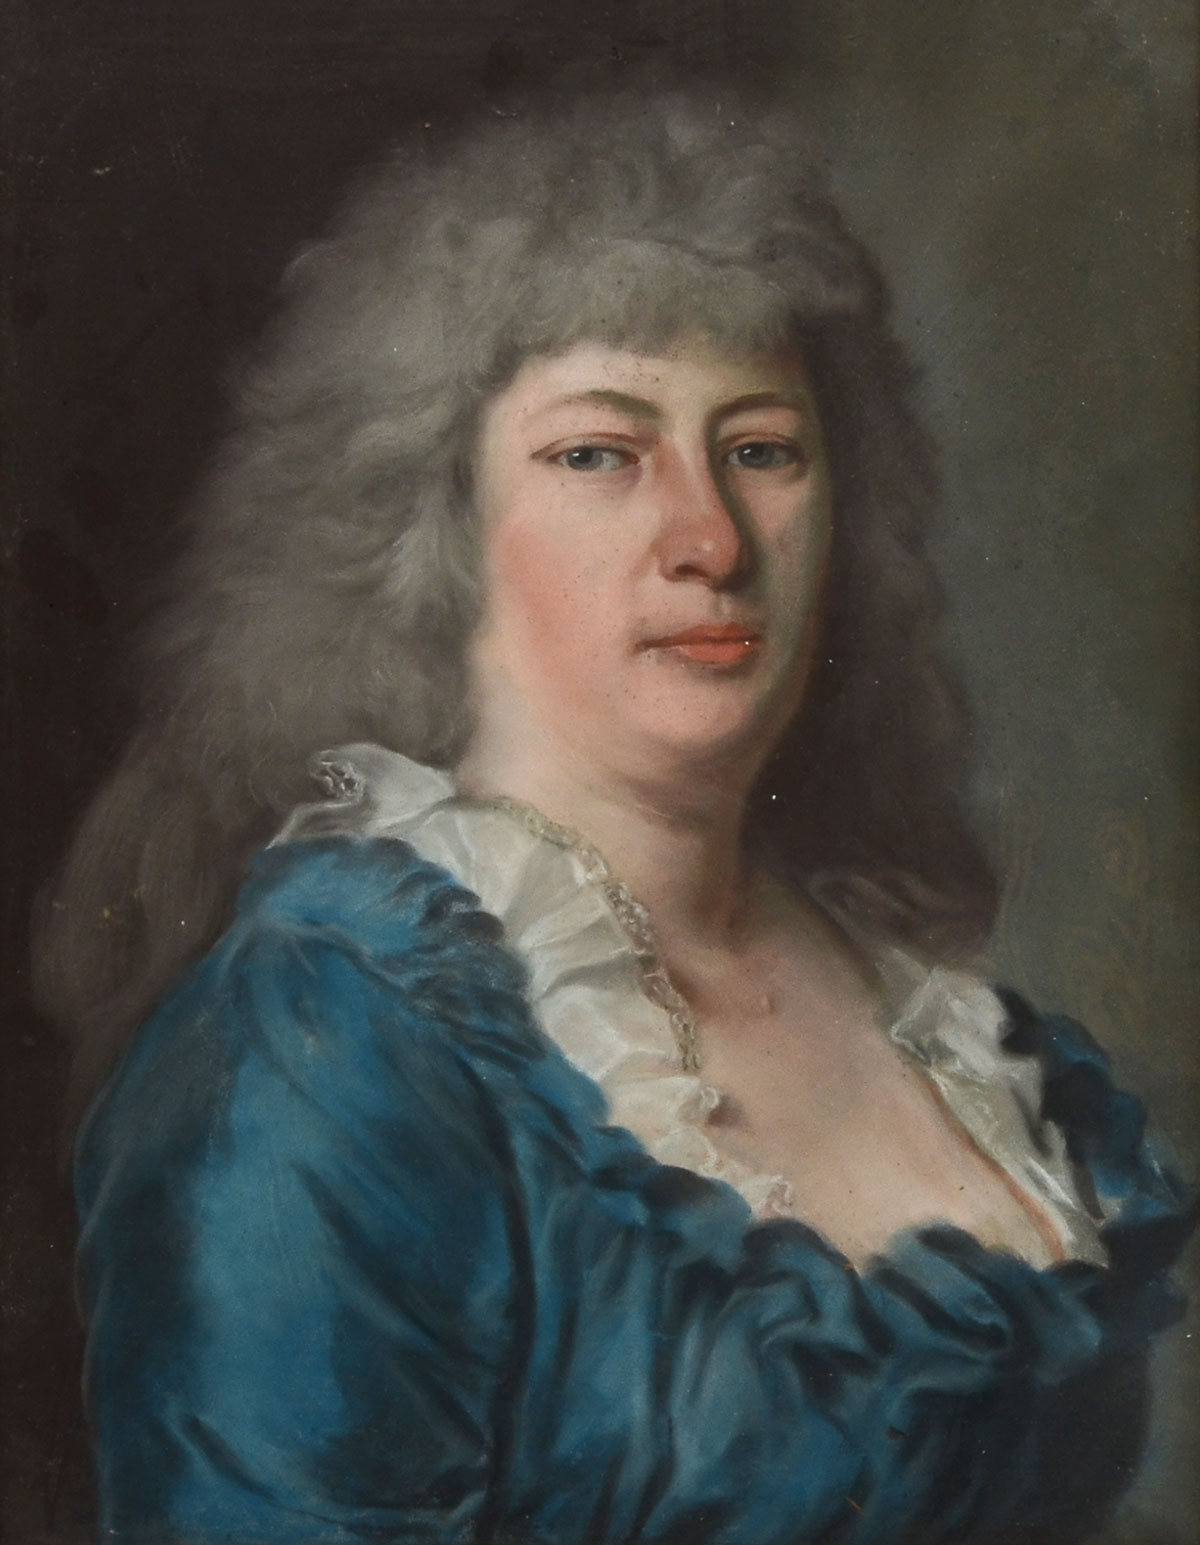 GOOD EARLY PORTRAIT OF A WOMAN